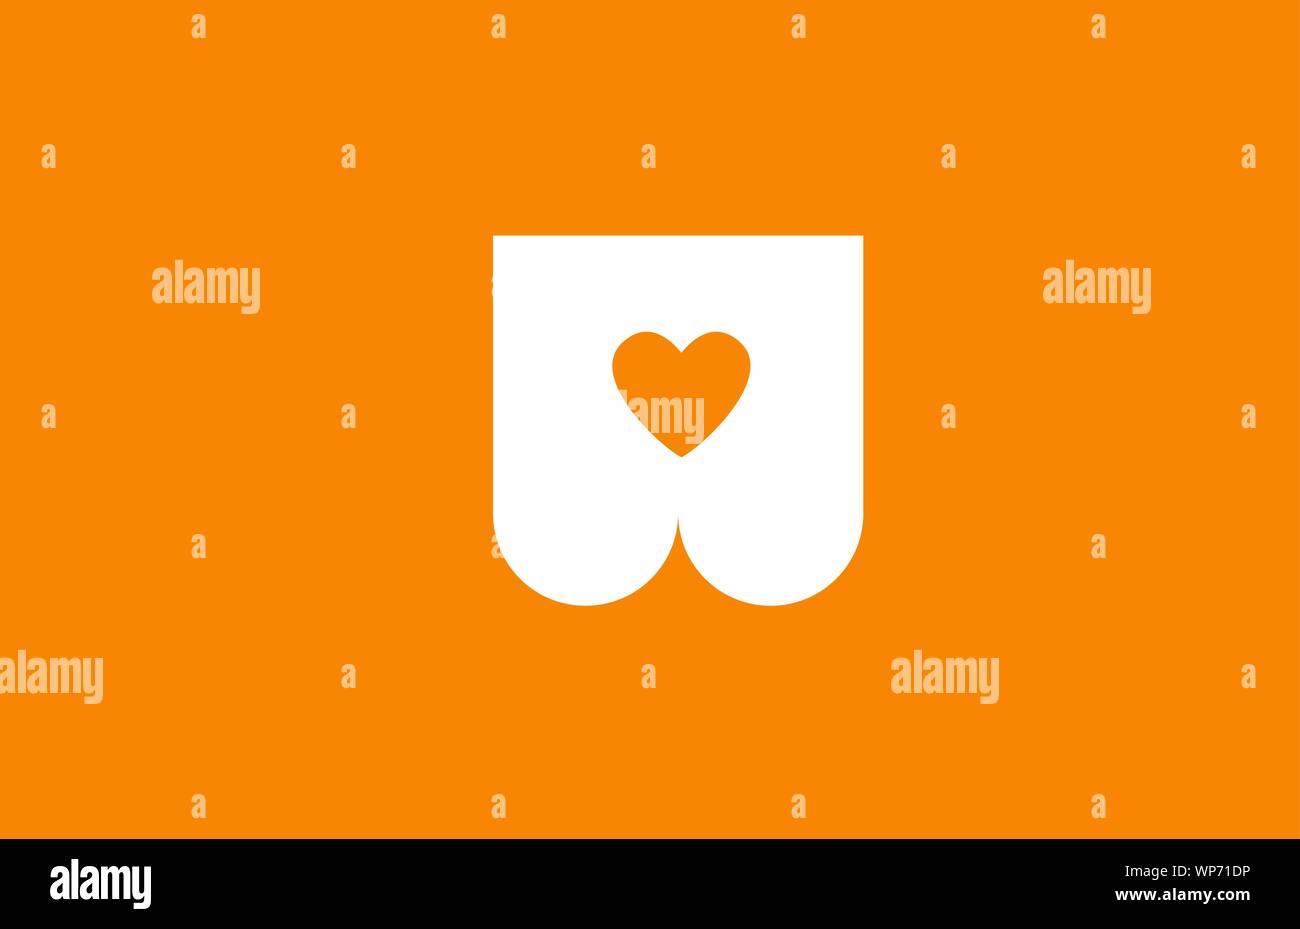 Love Heart Orange White Alphabet Letter W For Company Logo Icon Design Suitable As Logotype For A Business Stock Vector Image Art Alamy